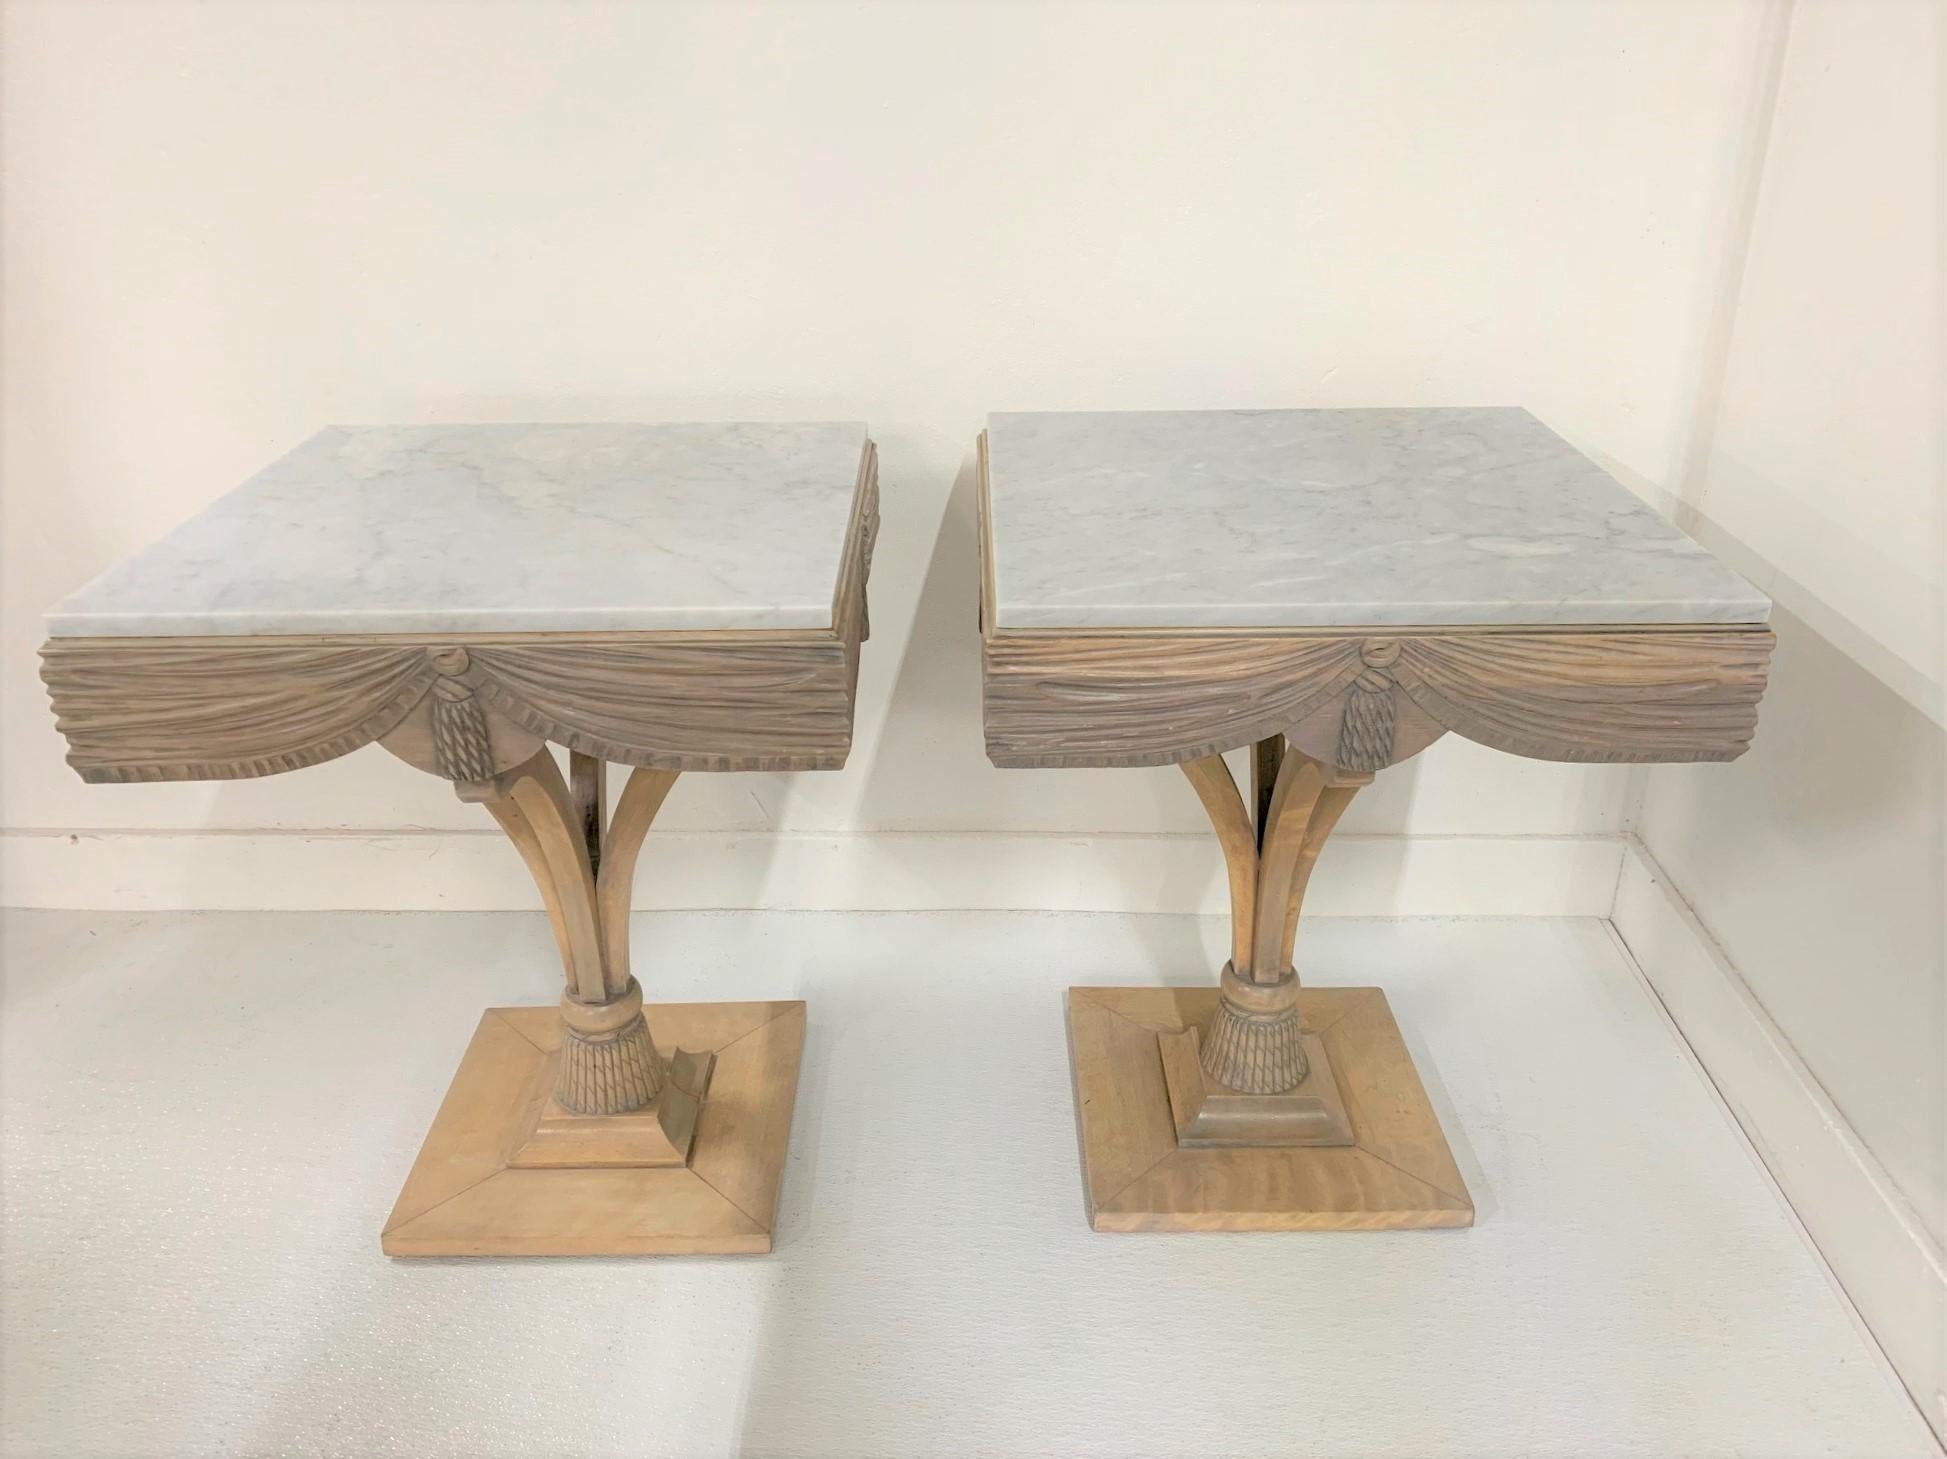 Pair of Grosfeld House plume marble-top side tables. The tables are bleached maple with Carrara marble tops and decorative bases. Hollywood Regency style.